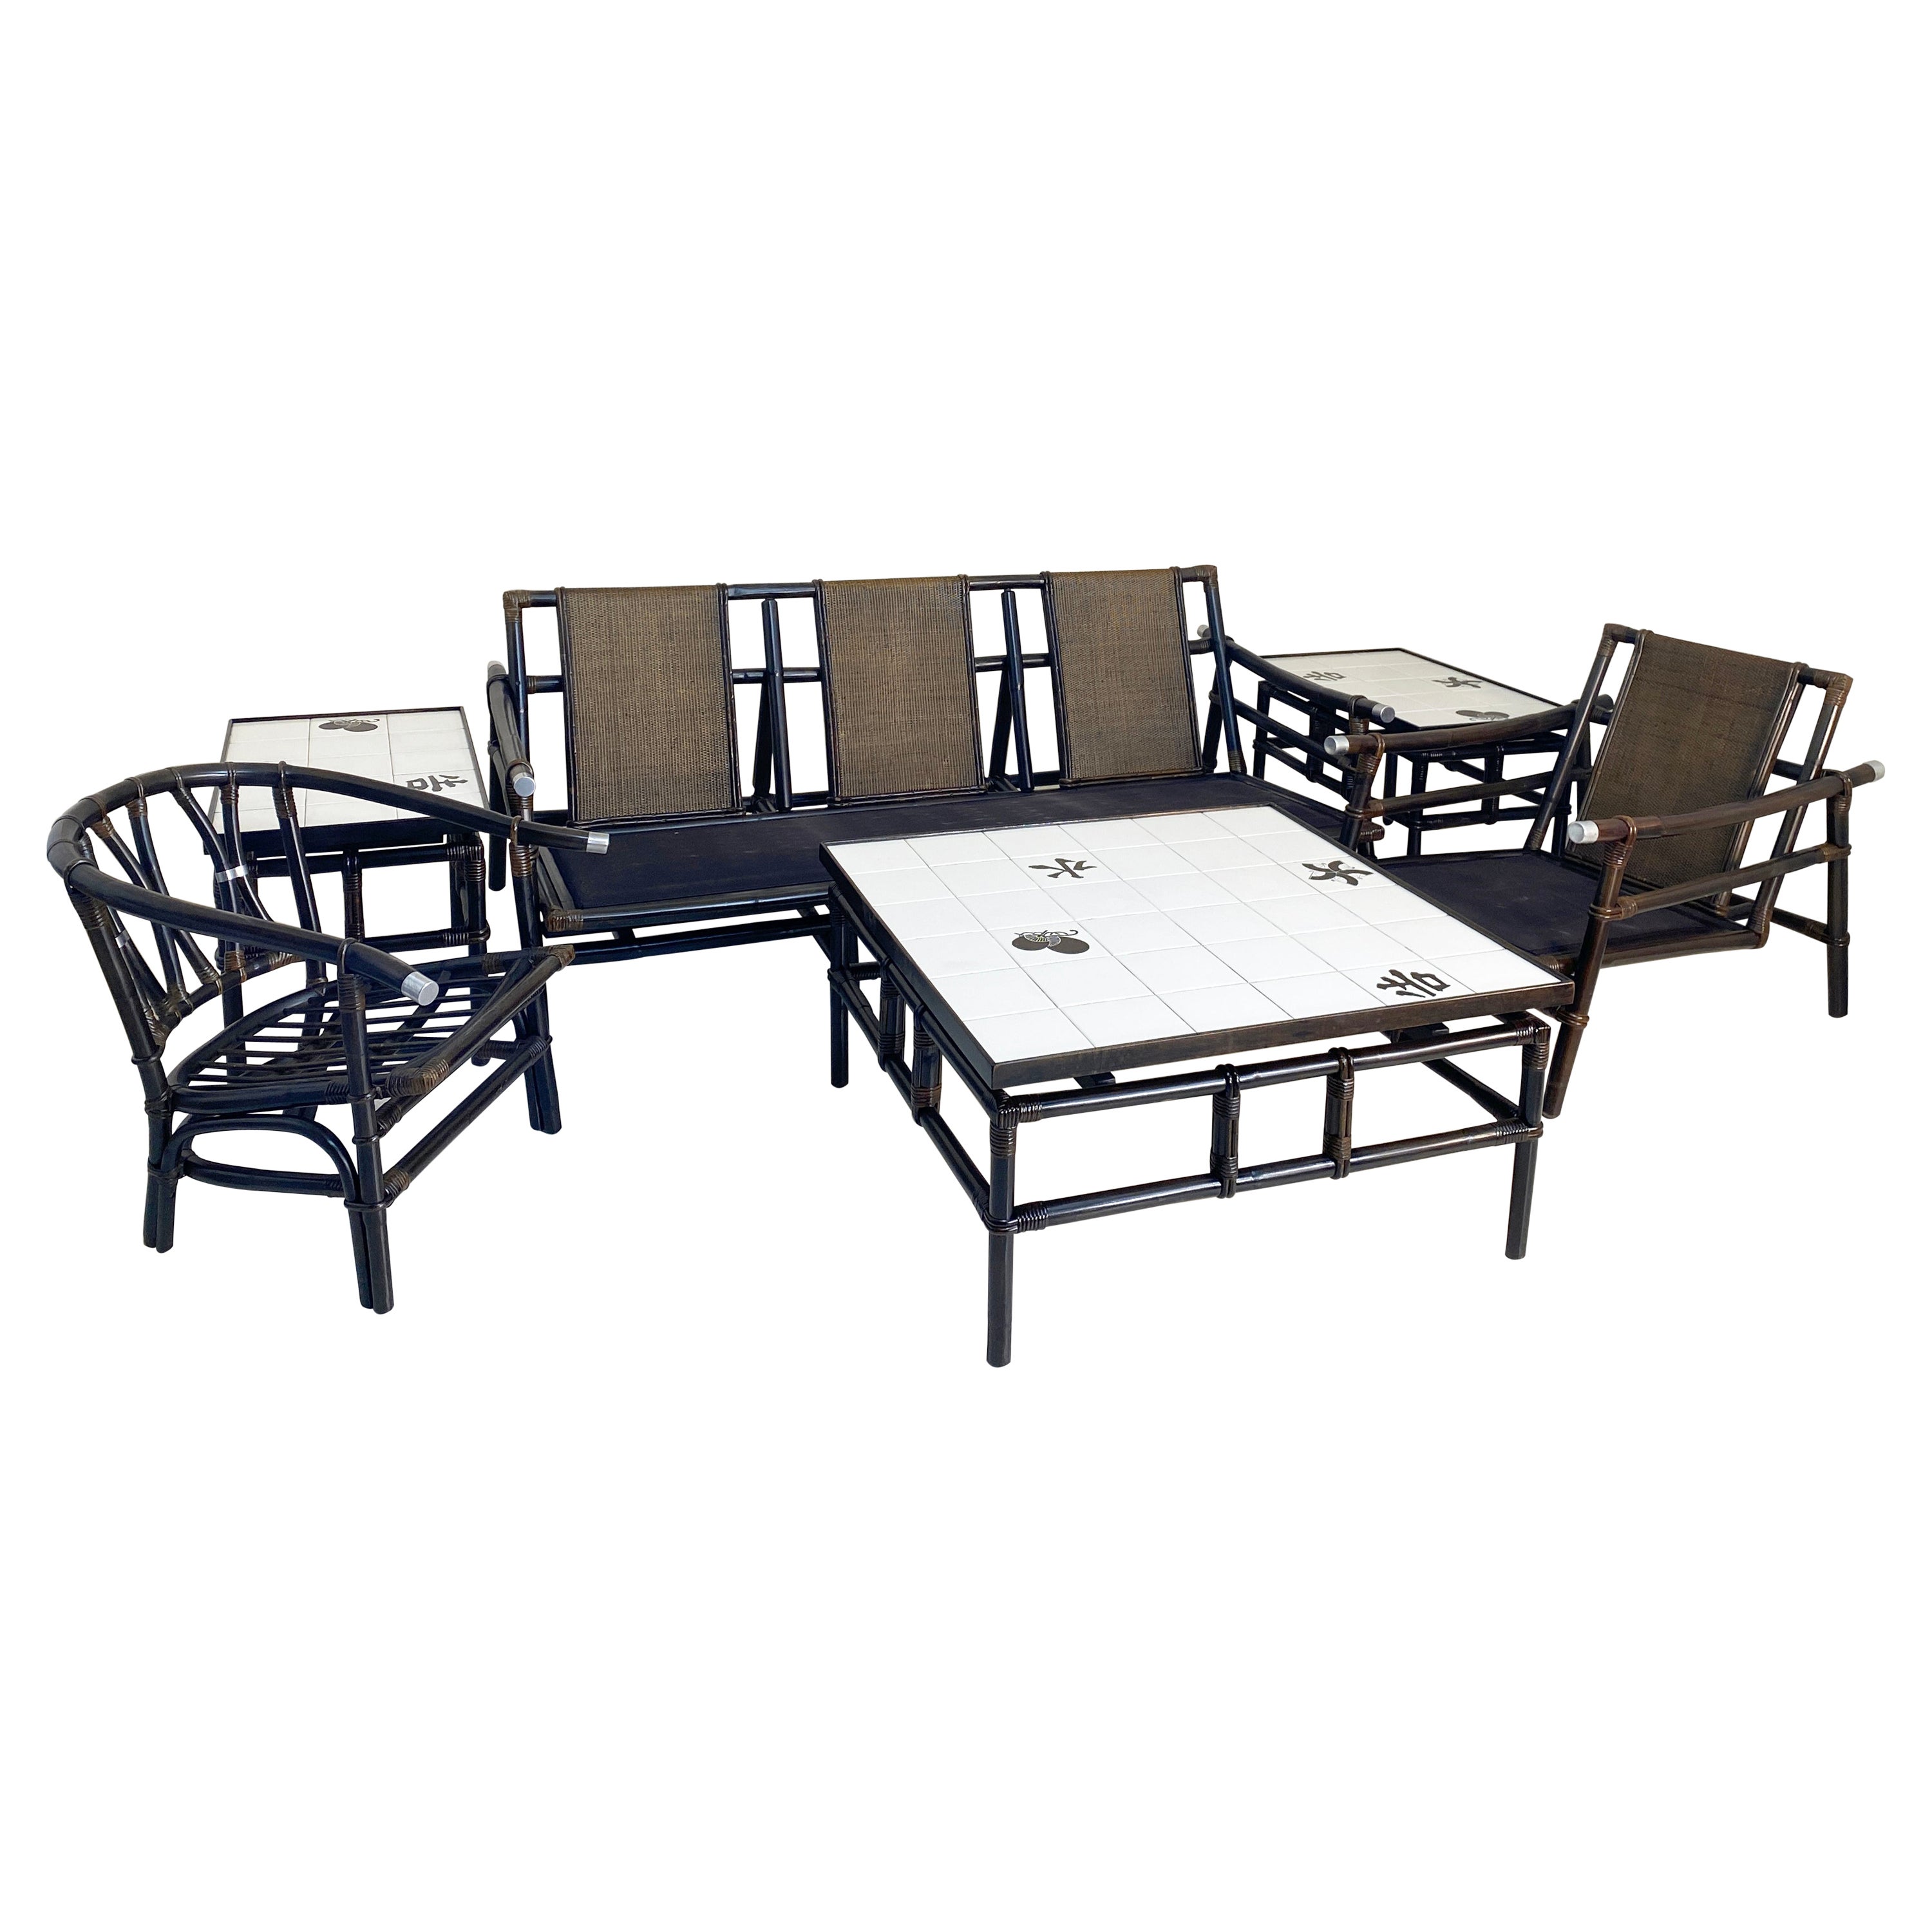 John Wisner for Ficks Reed Far Horizons Collection Bamboo Rattan Suite